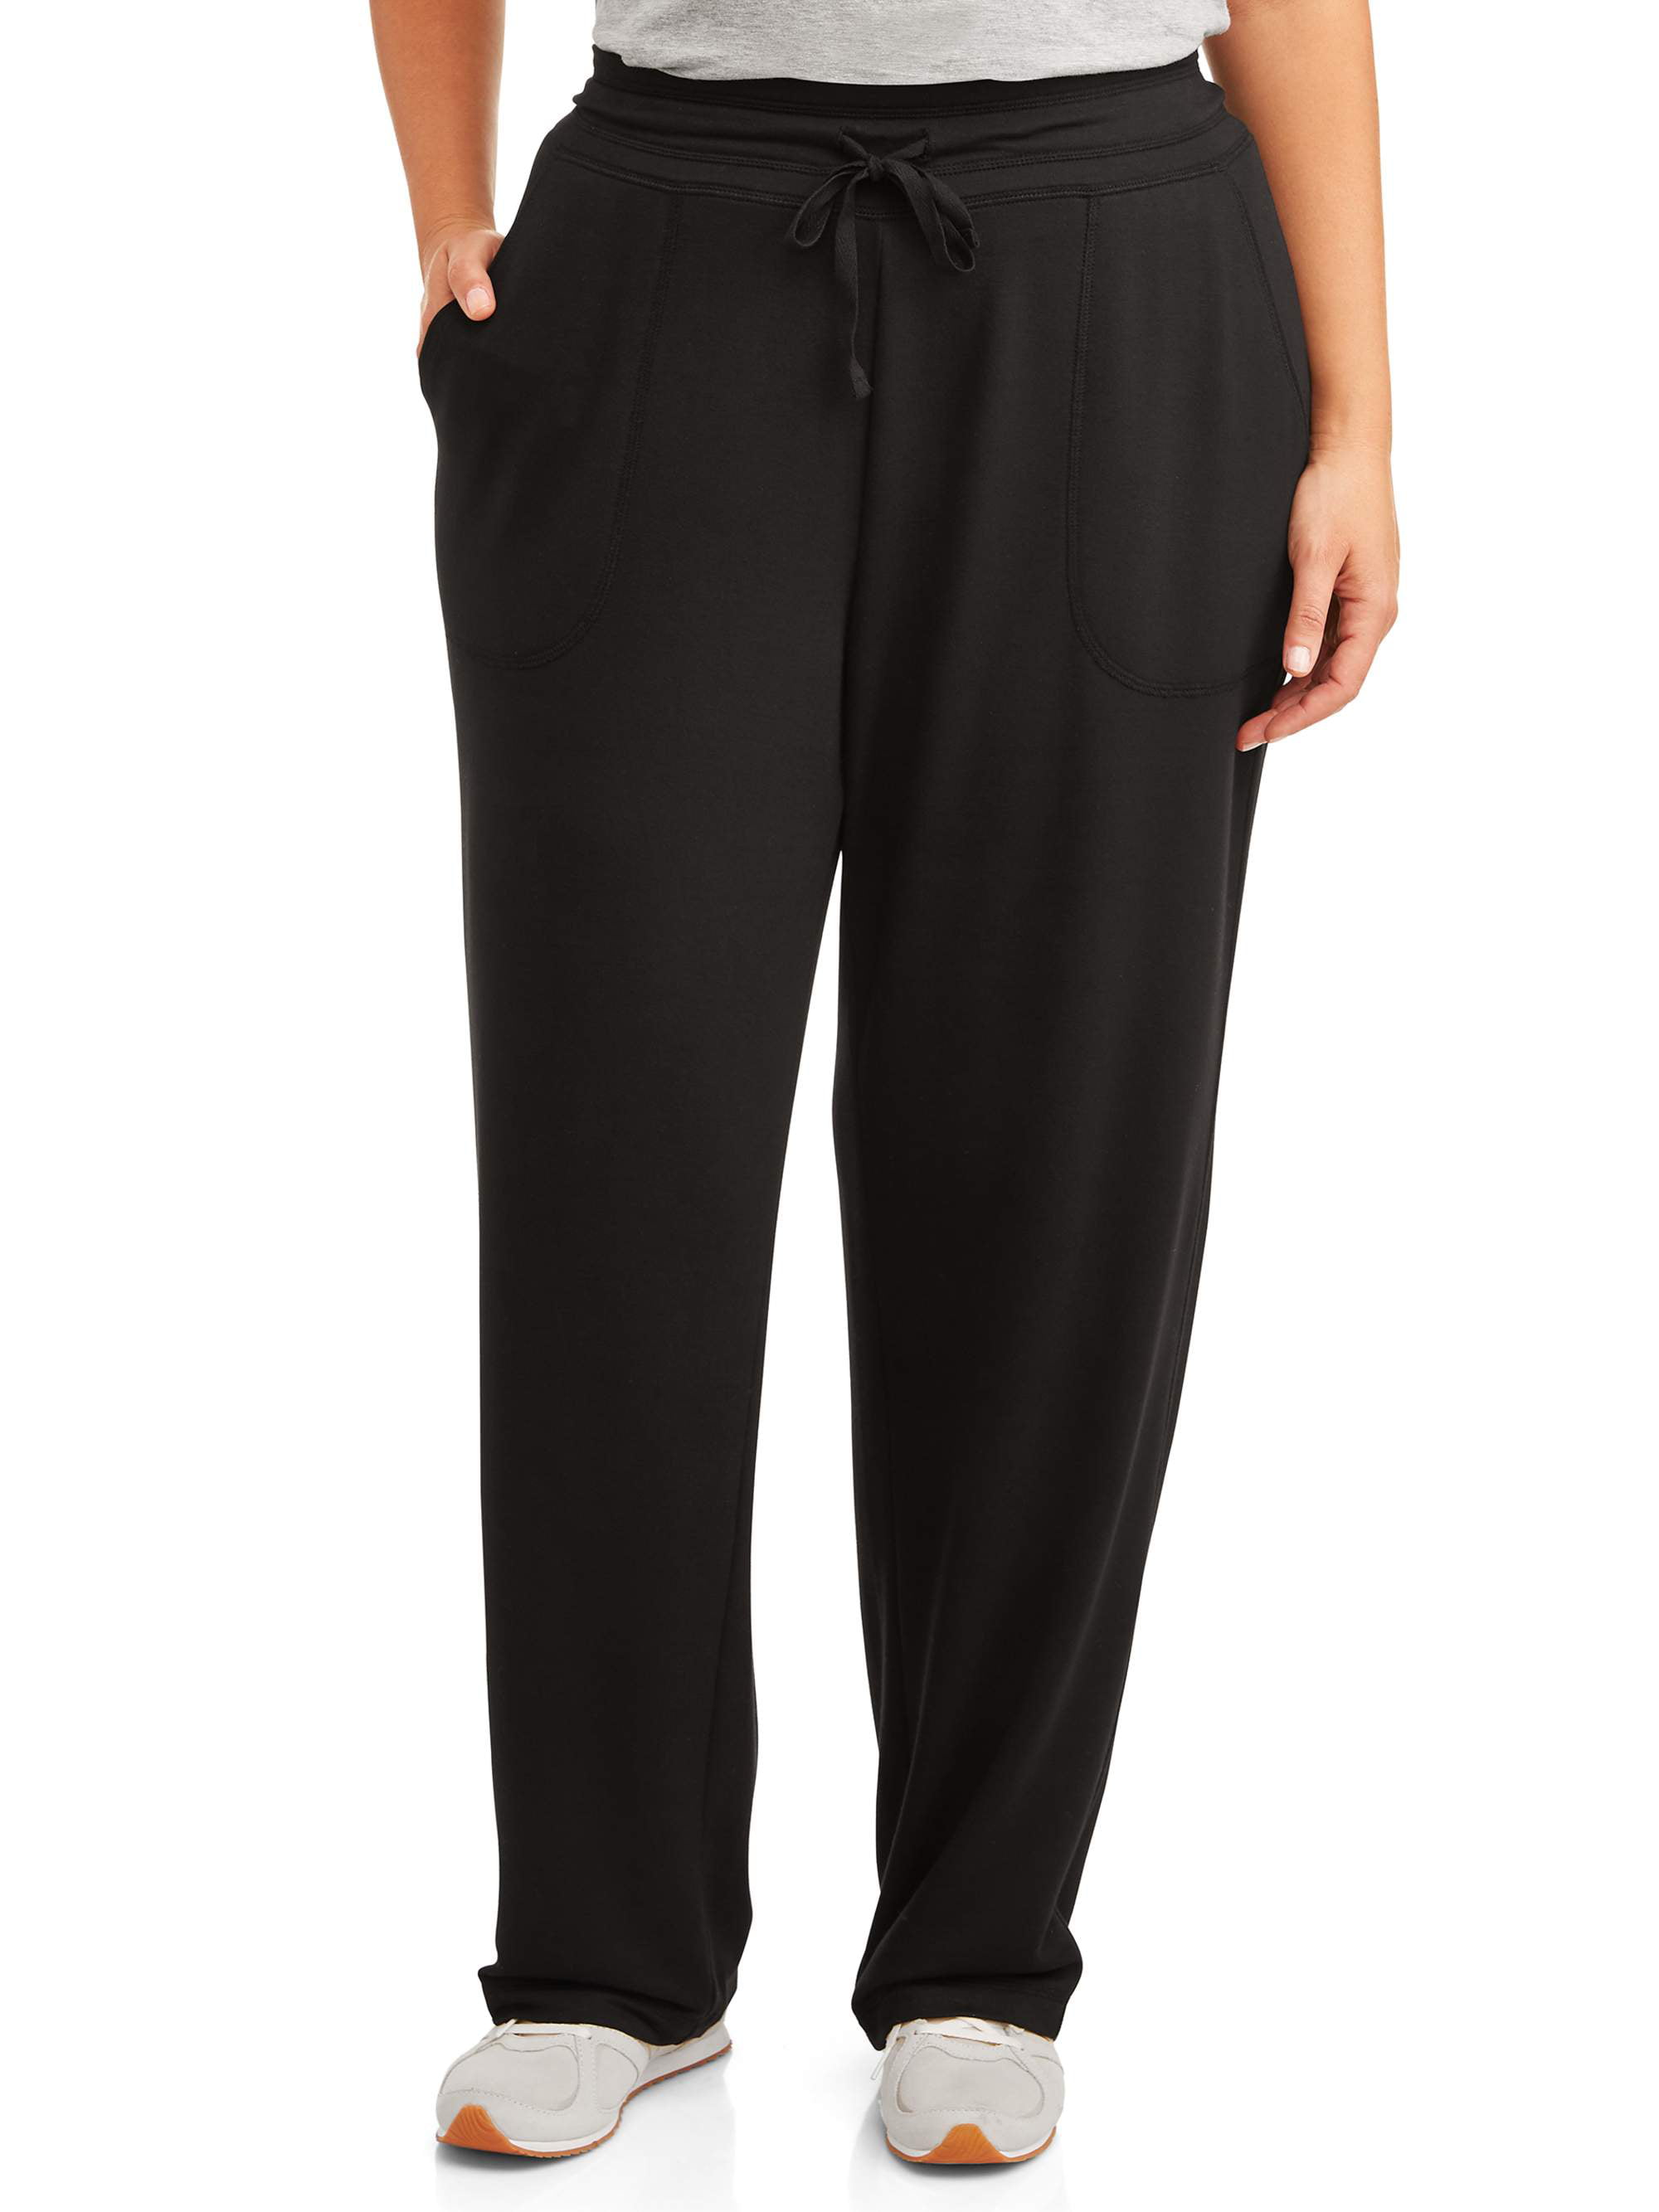 Athletic Works Plus Size Dri More Relaxed Fit Sweatpants - Walmart.com